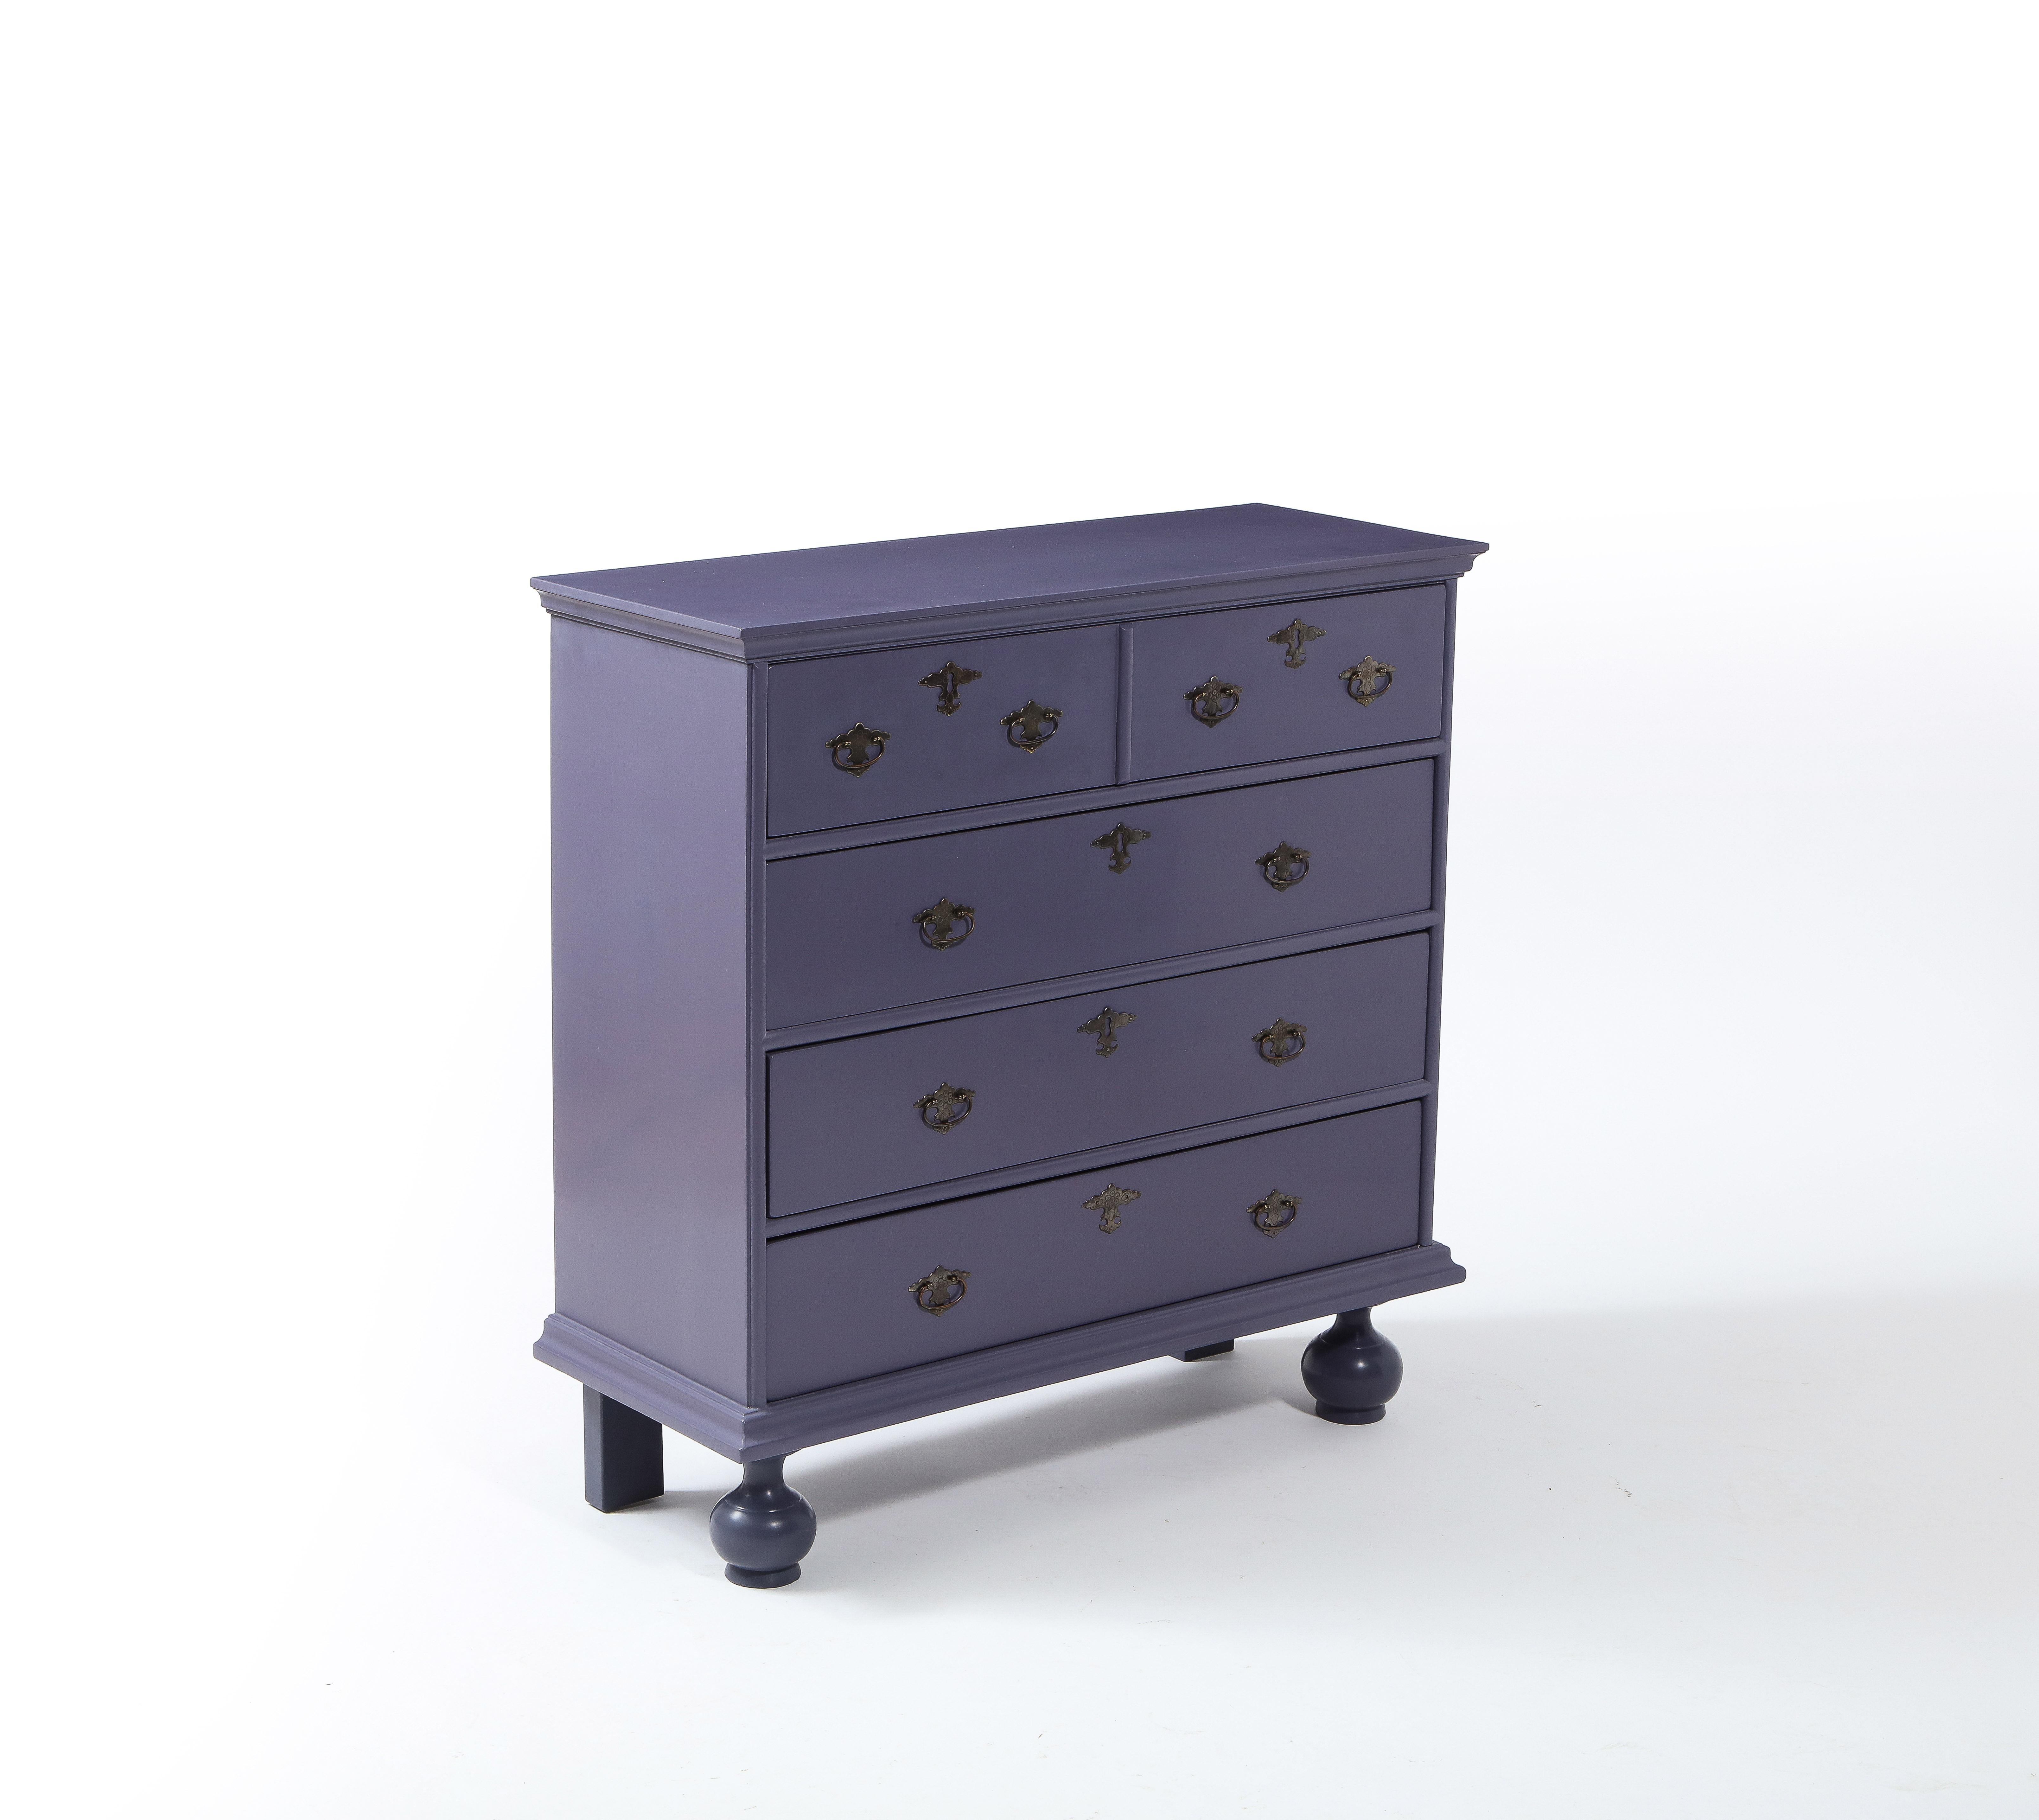 20th Century Lavender Purple Lacquer Shallow Dresser Chest of Drawers